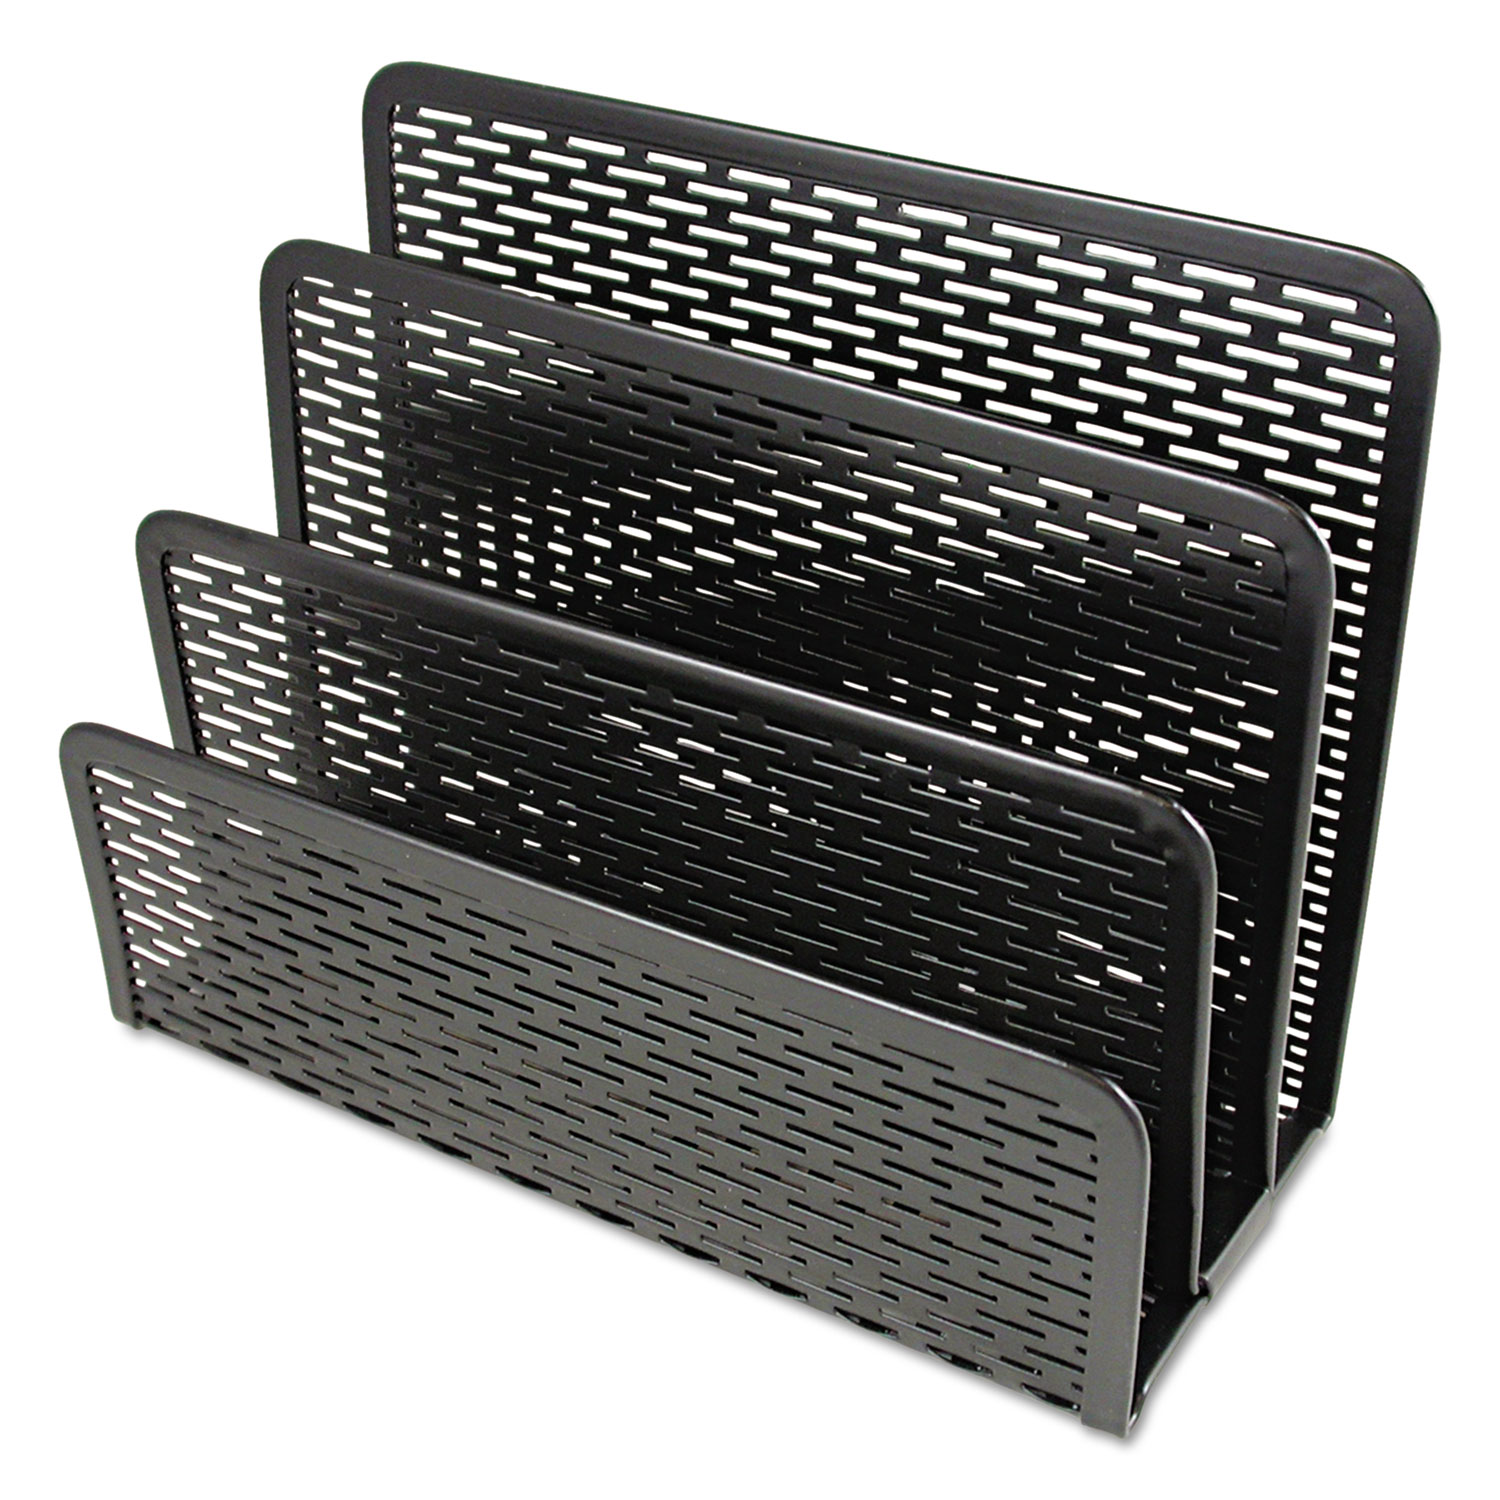 Urban Collection Punched Metal Letter Sorter, 6 1/2 x 3 1/4 x 5 1/2, Black